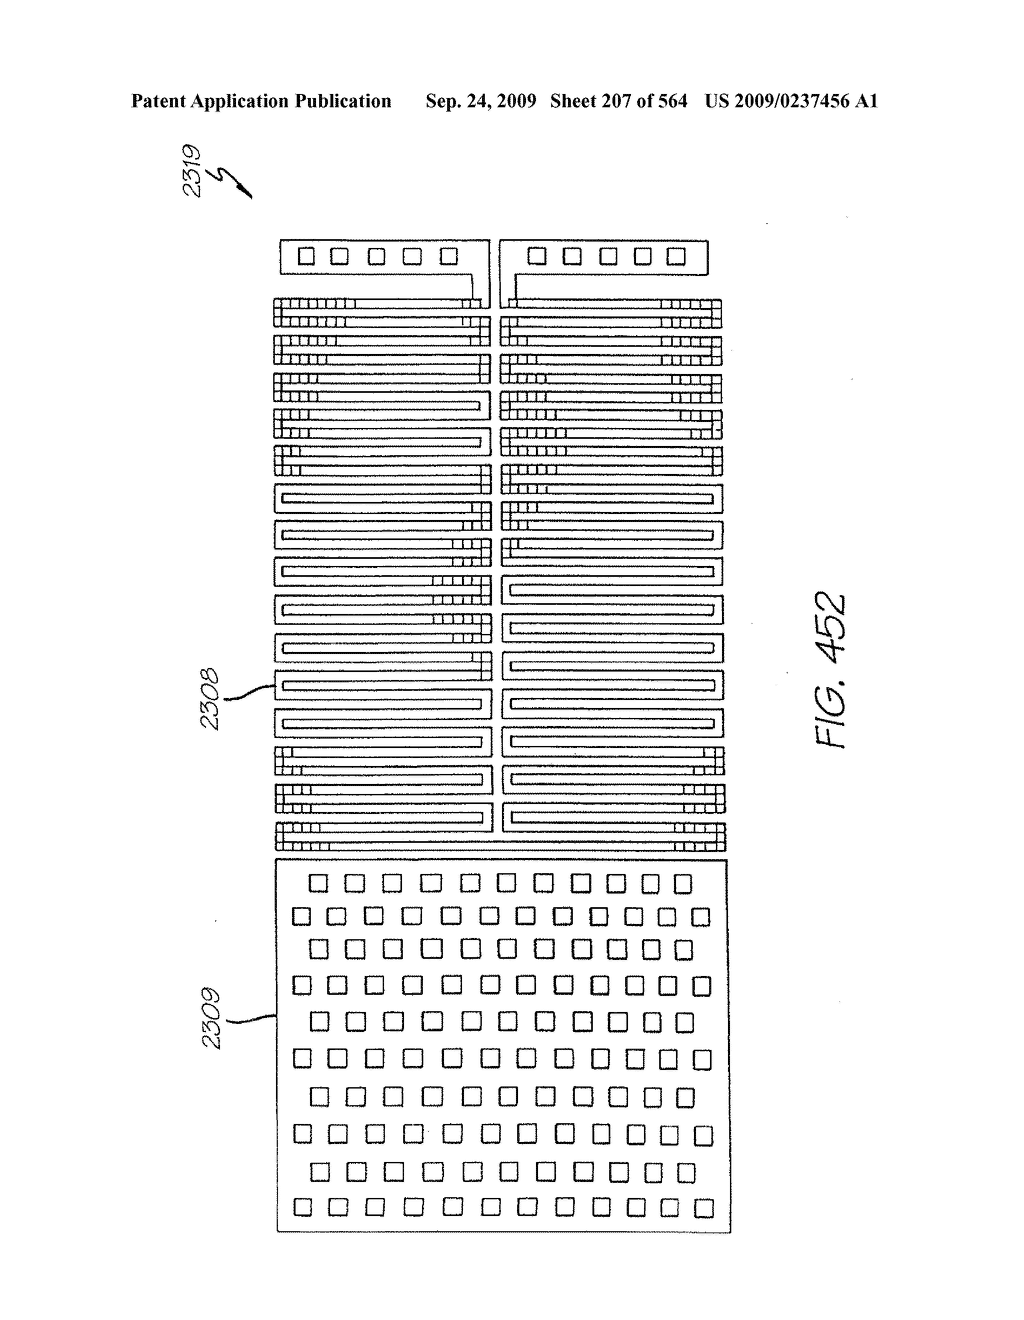 Inkjet Printhead With Paddle For Ejecting Ink From One Of Two Nozzles - diagram, schematic, and image 208